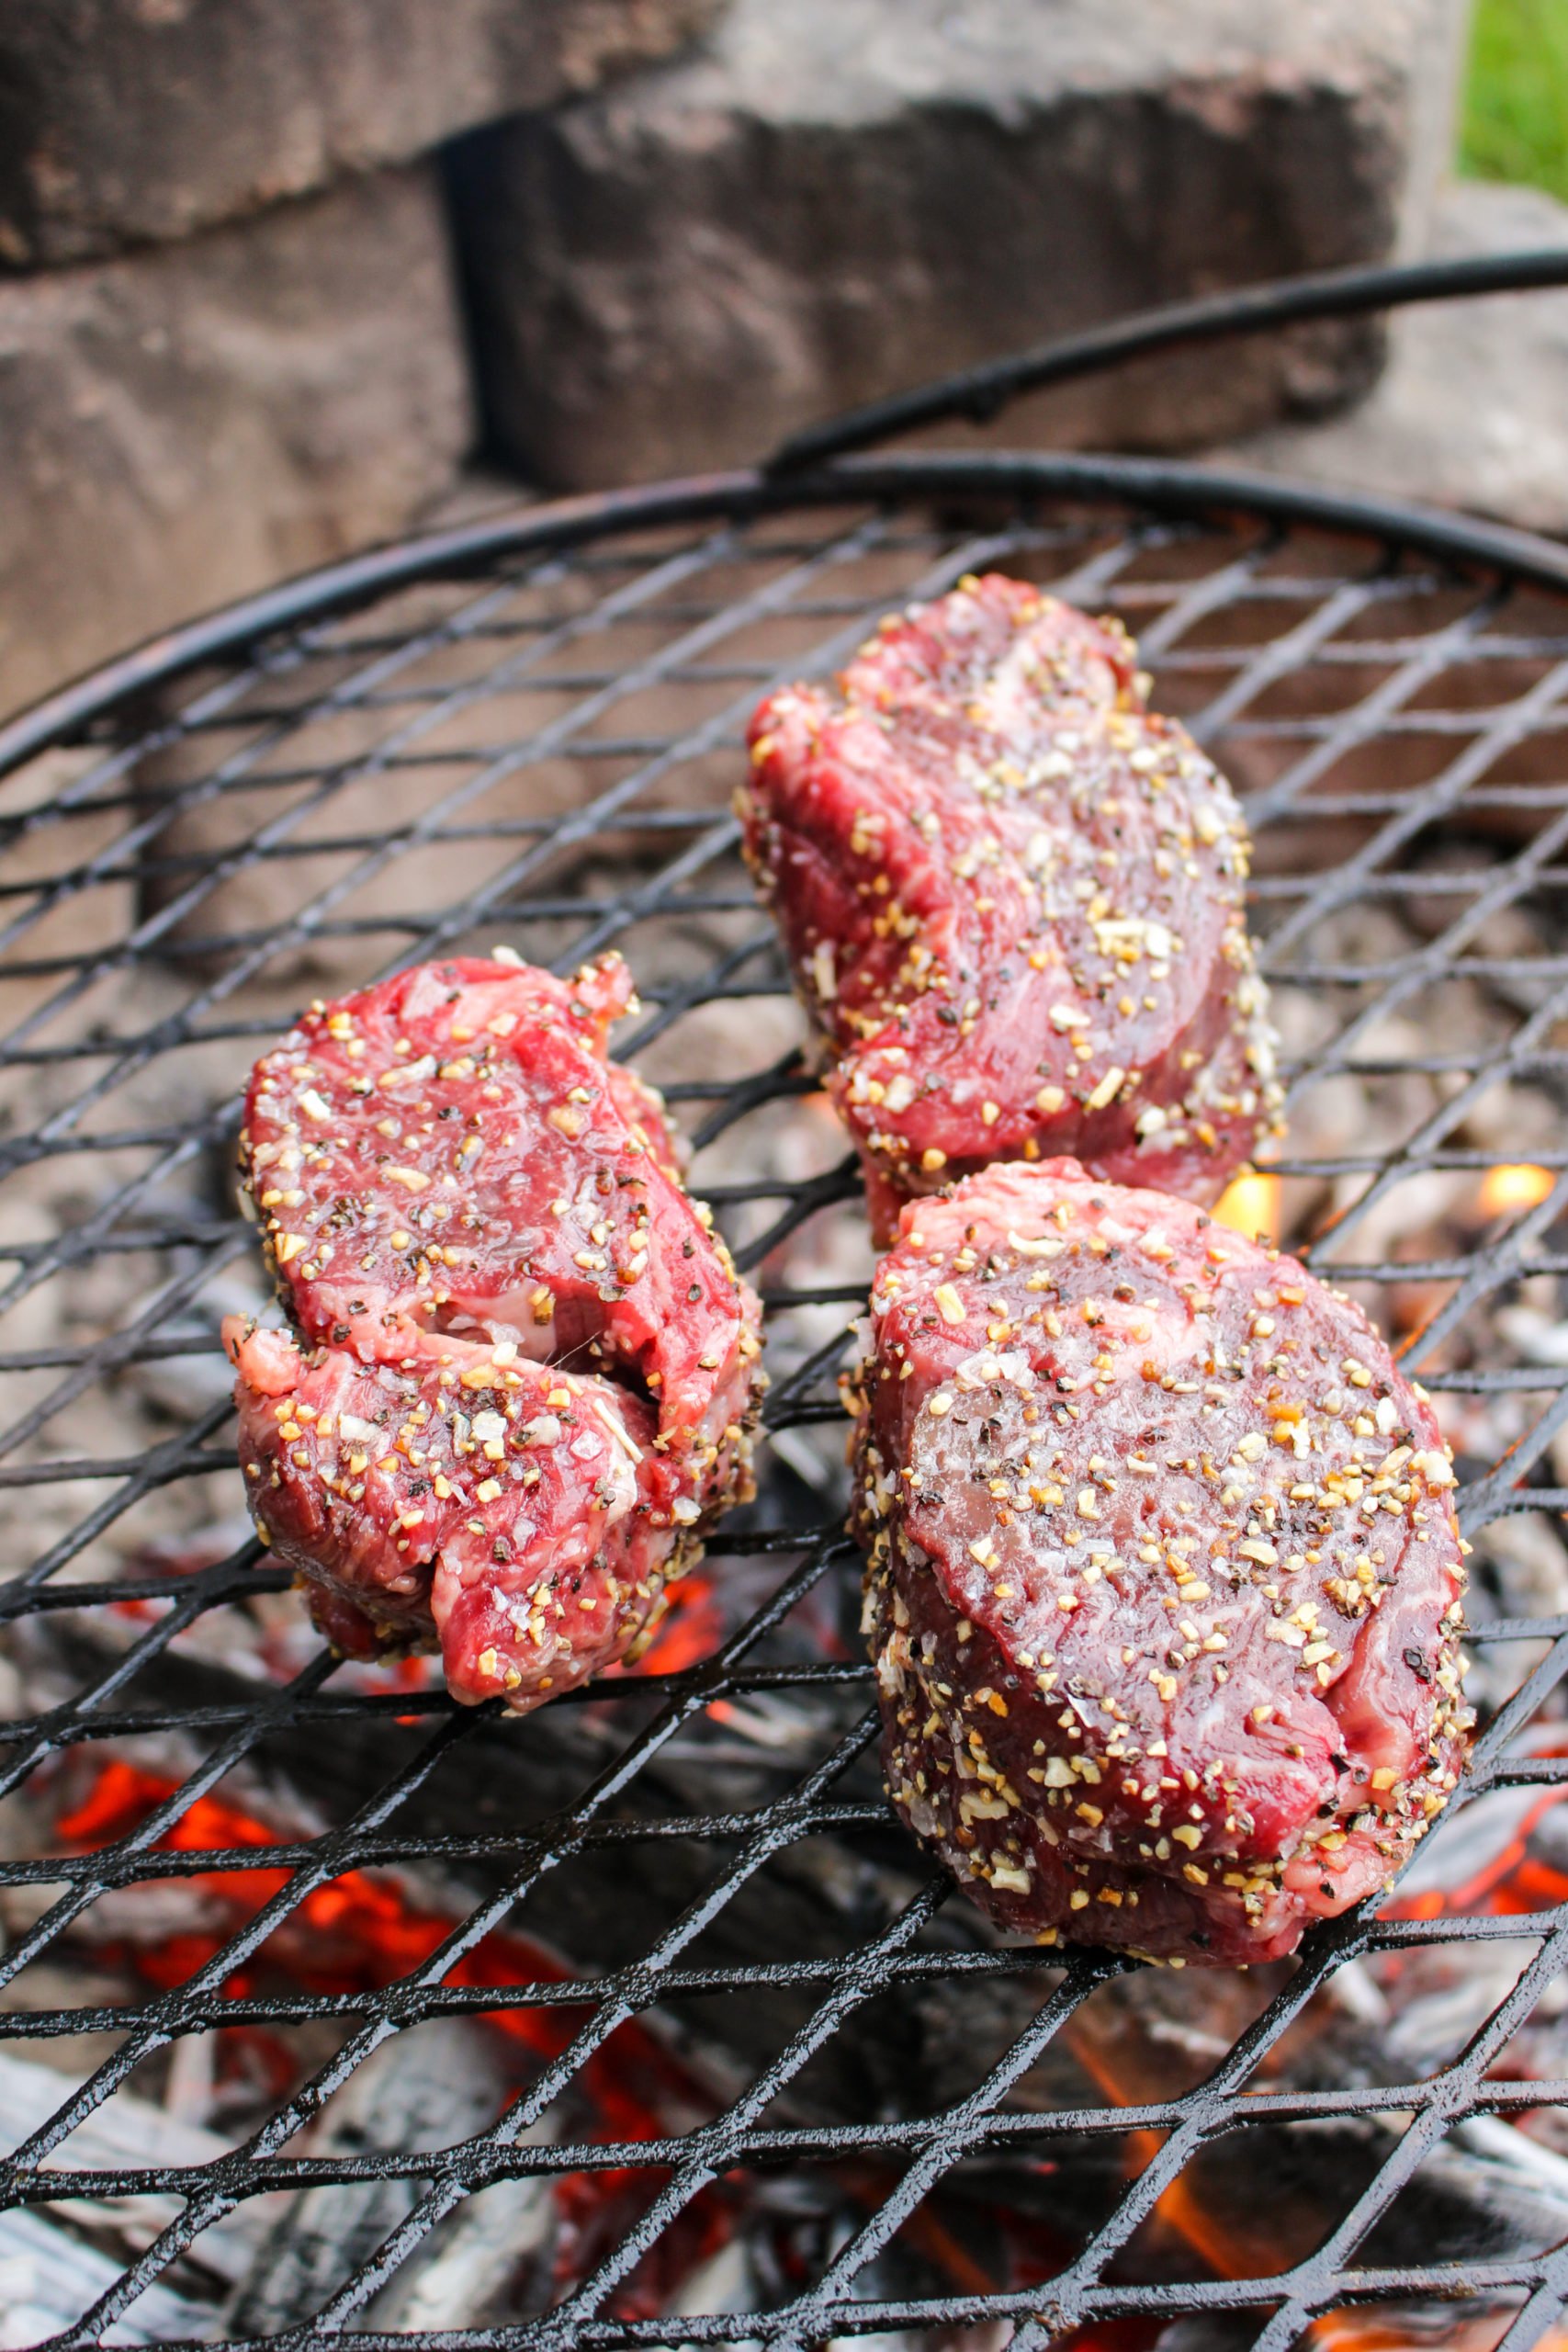 Grilled Filets with Chile Vinegar Sauce